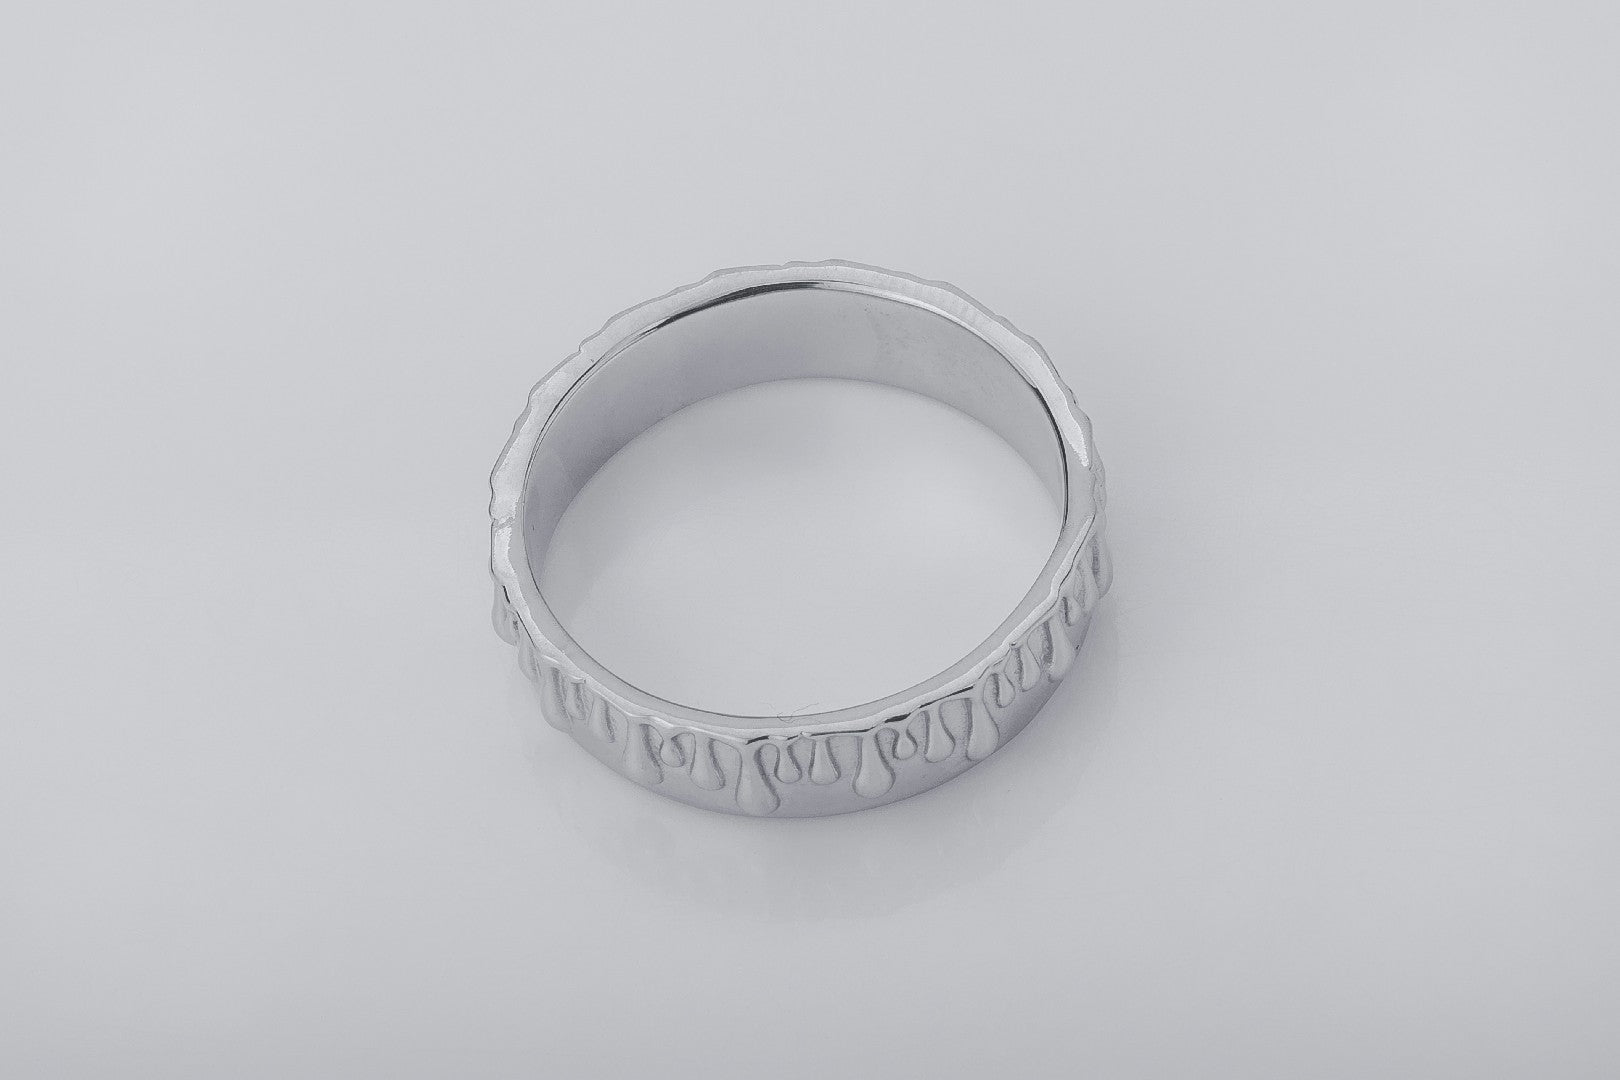 Molten Wax Band Ring, Rhodium plated 925 silver